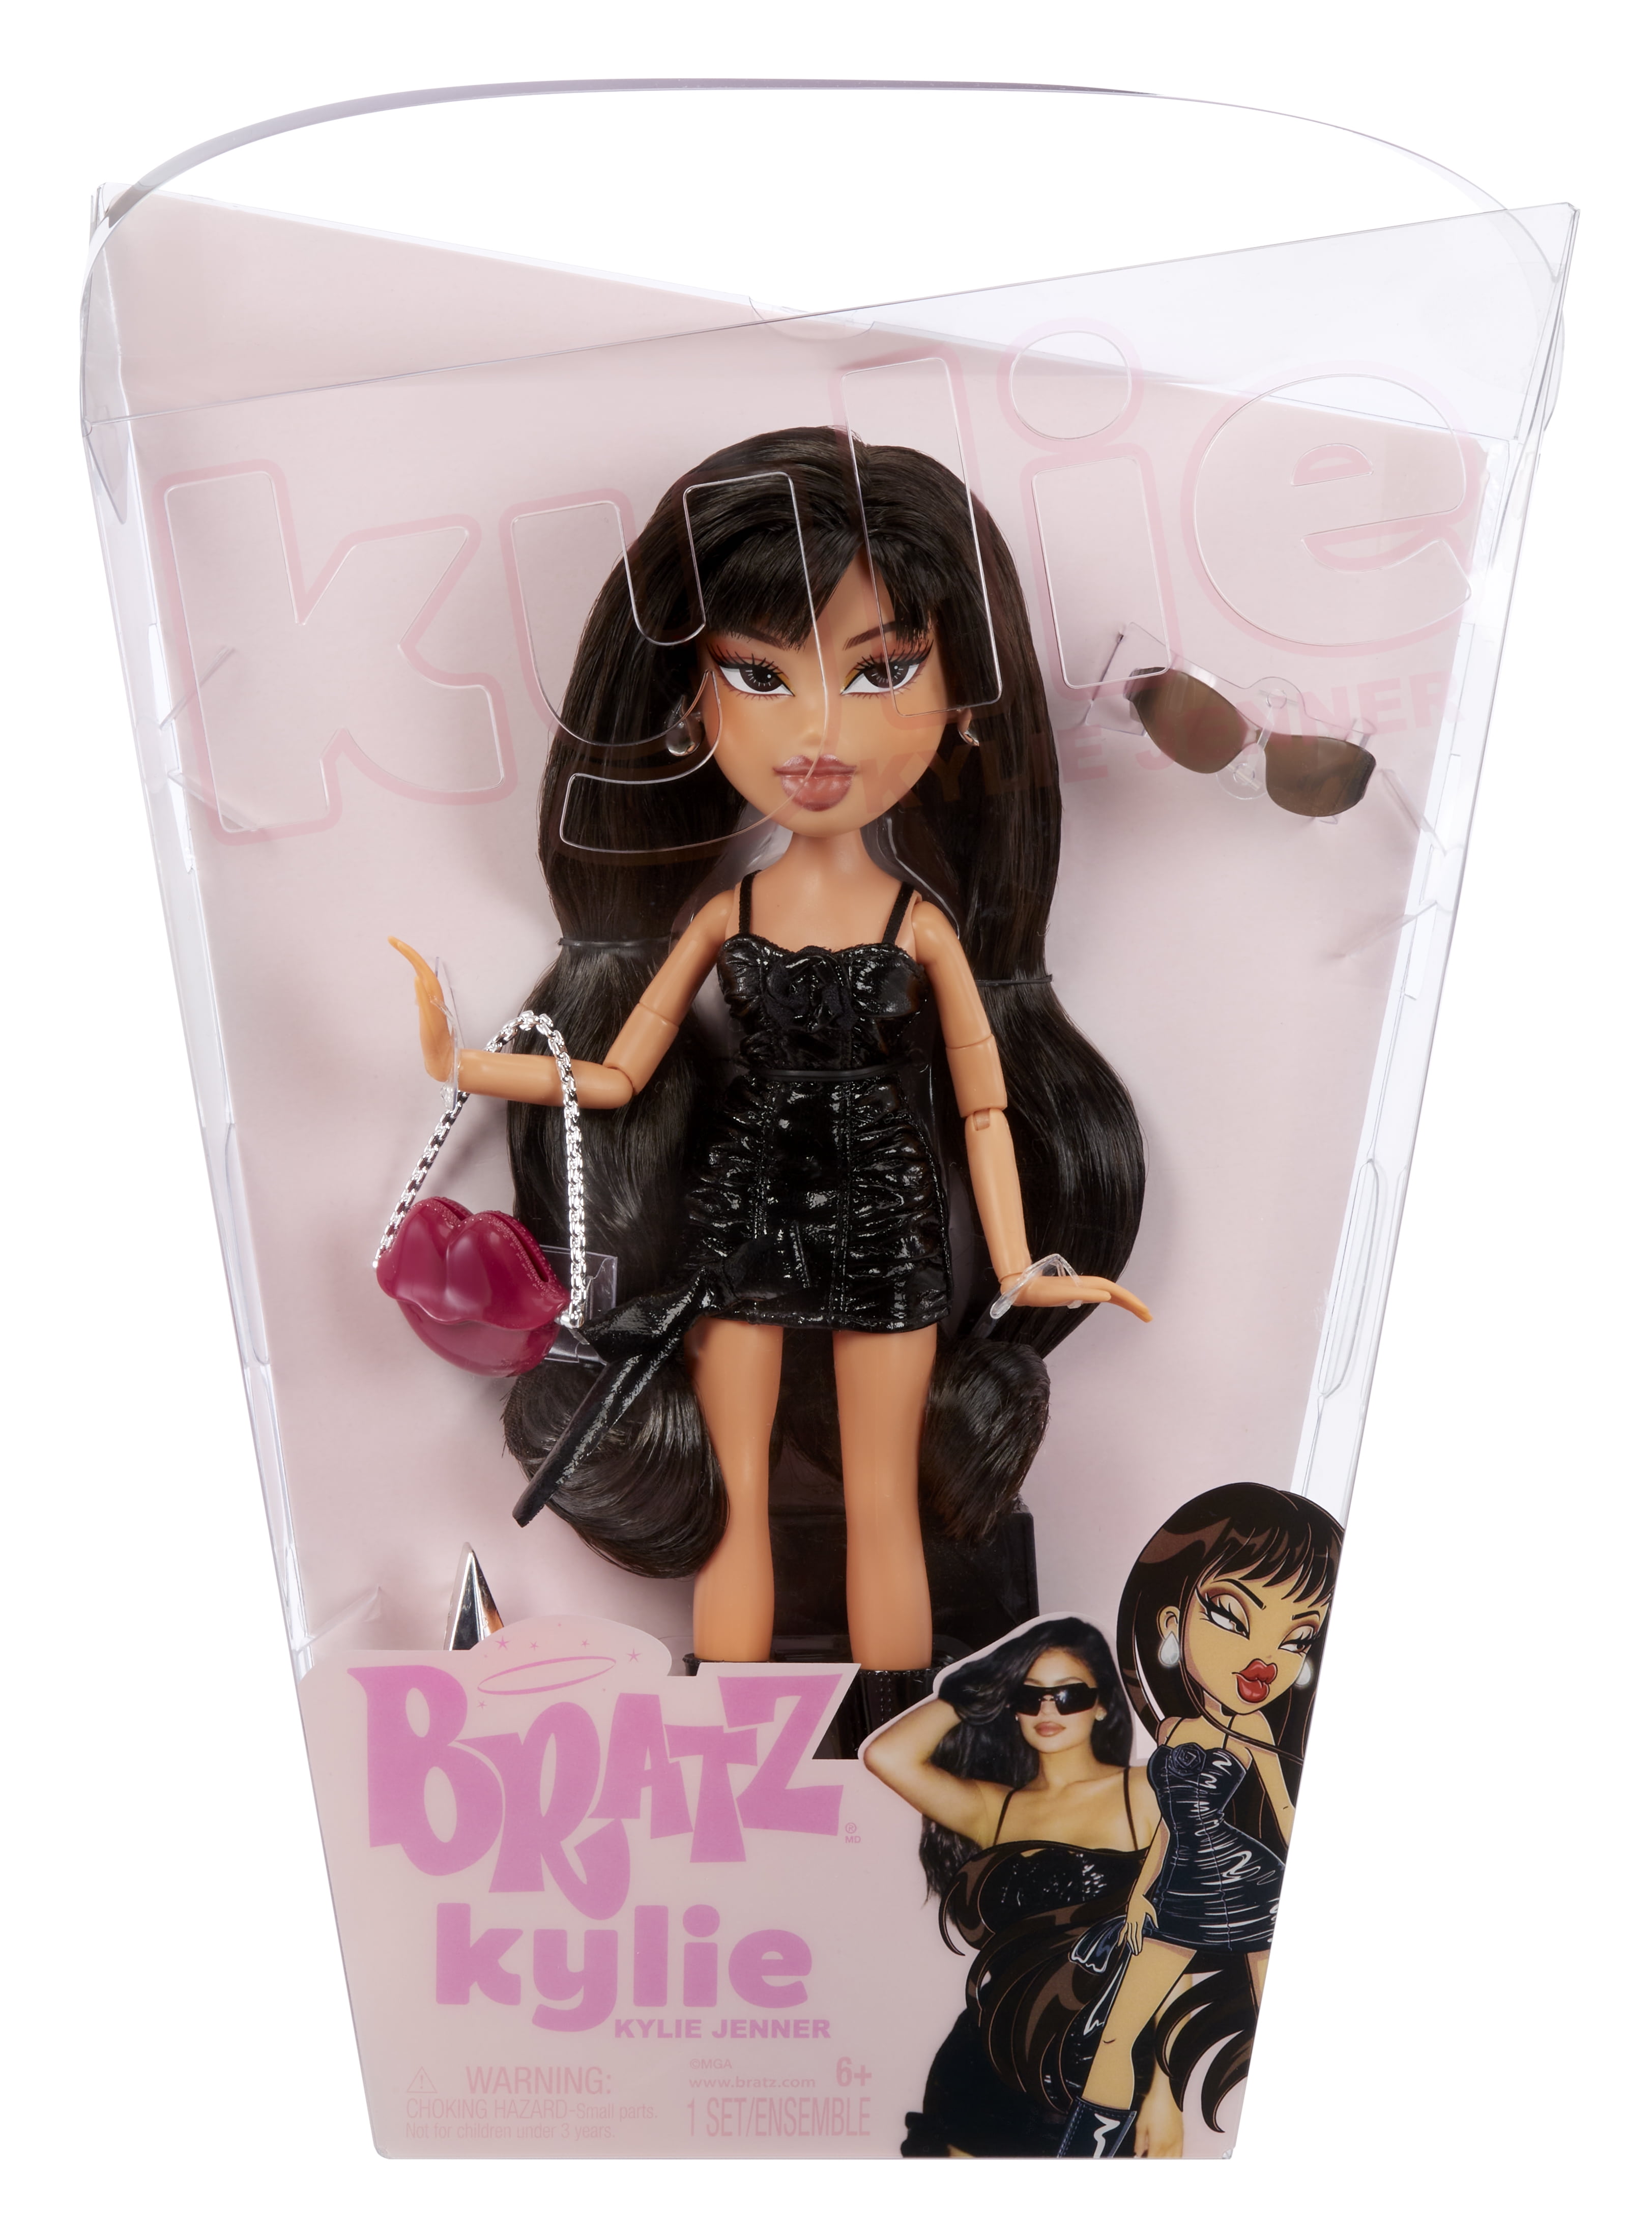 Bratz Hot Summer Days Super Summer Pool Brand New For Sale in Tramore,  Waterford from barrman